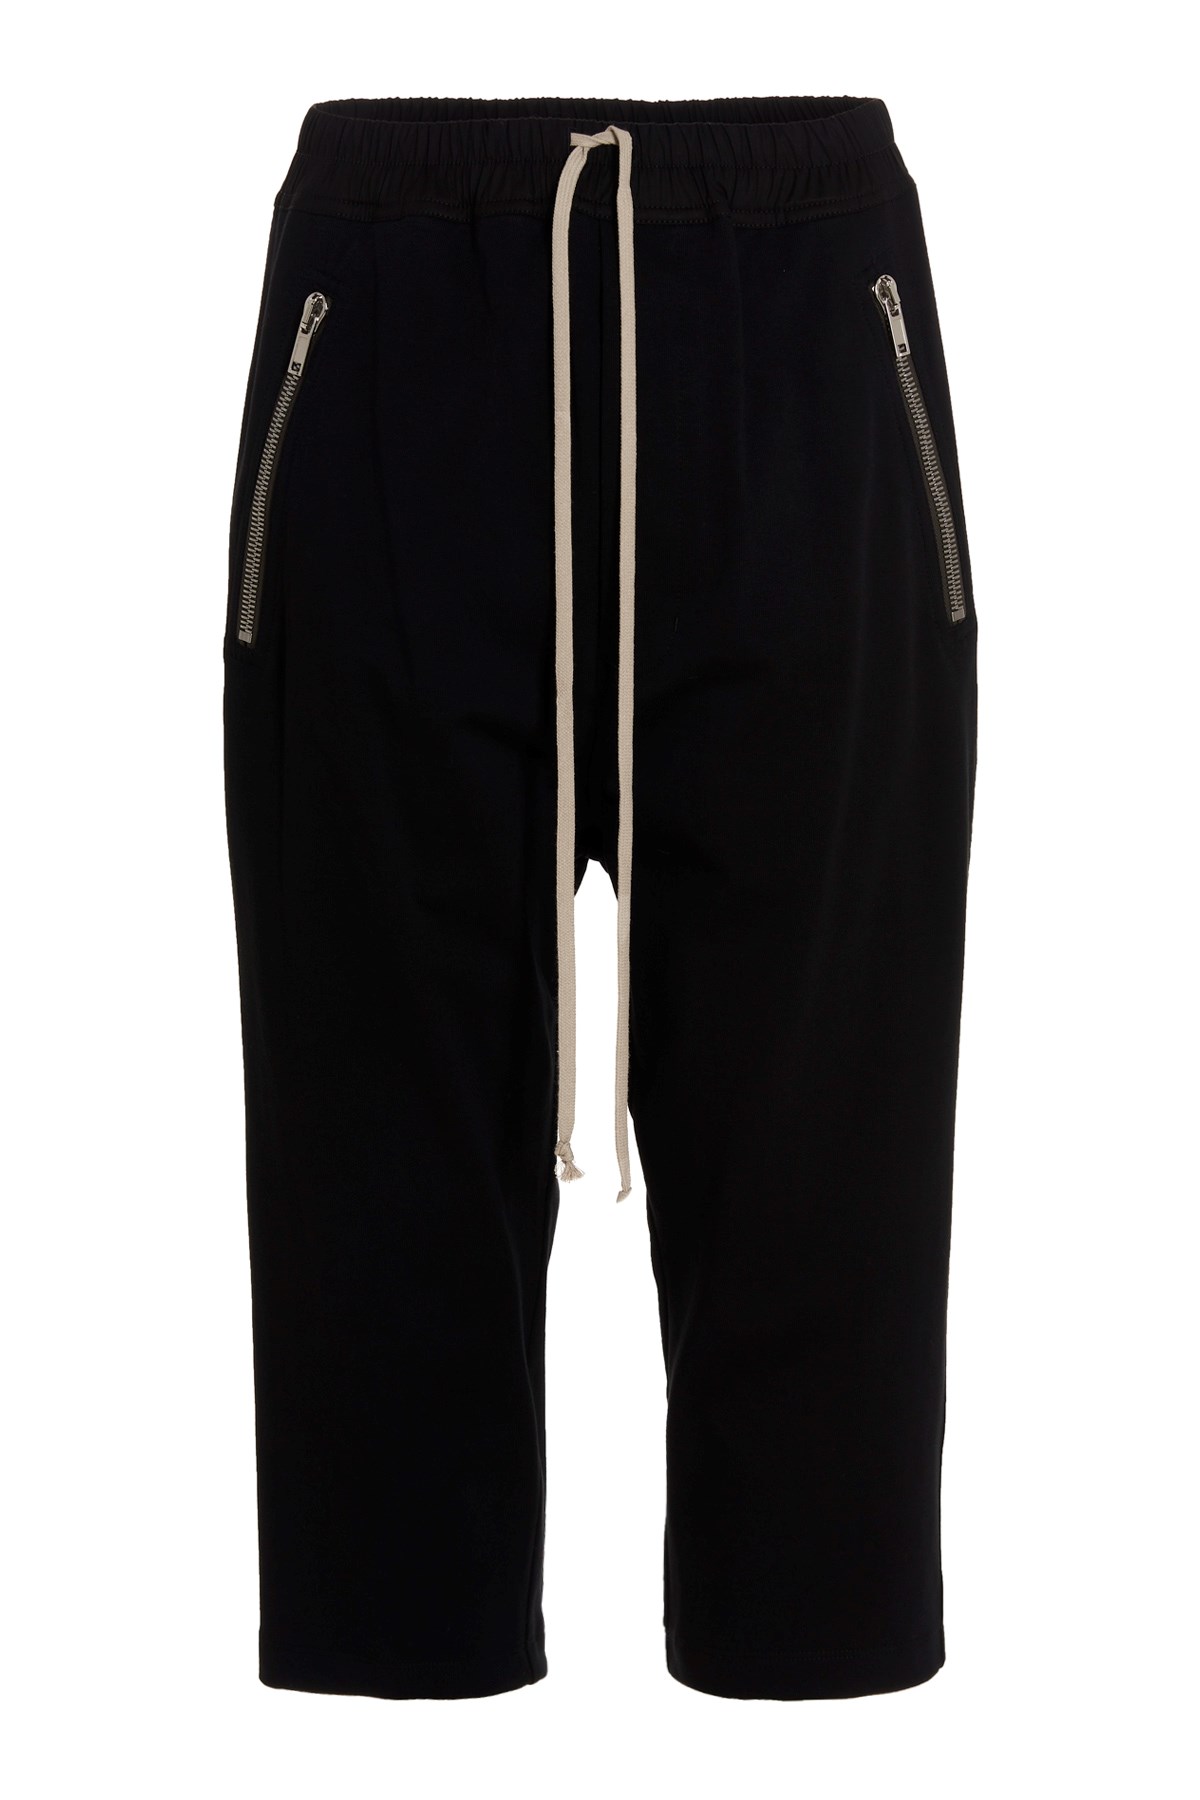 RICK OWENS ‘Tectual Cropped’ Trousers